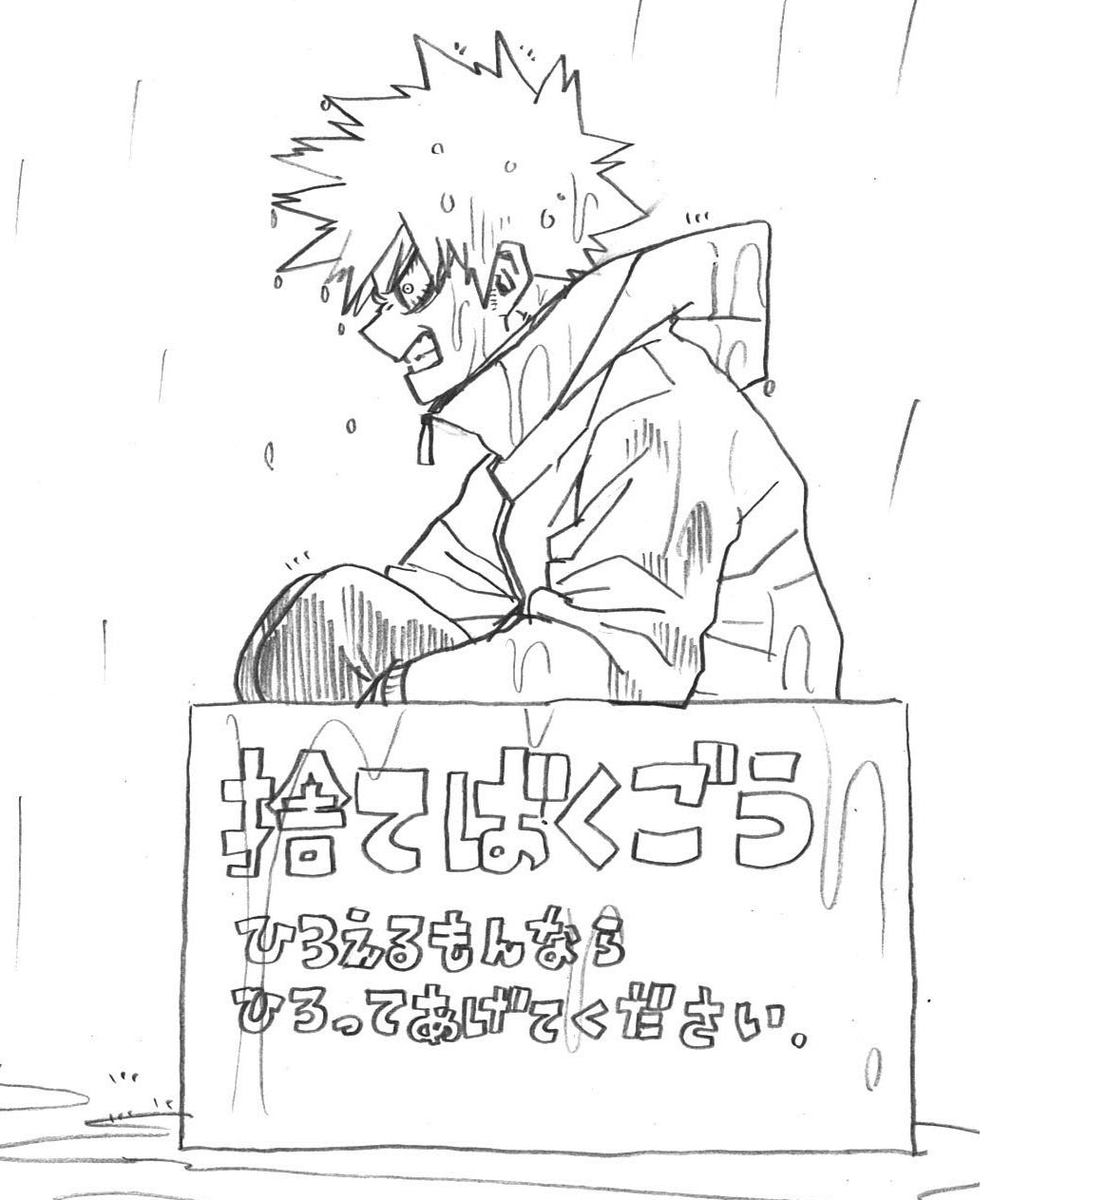 #173 Abandoned Bakugo (3 votes)
#188 The guy who makes everyone mad bc of his cry [Dynama]  (2 votes) 